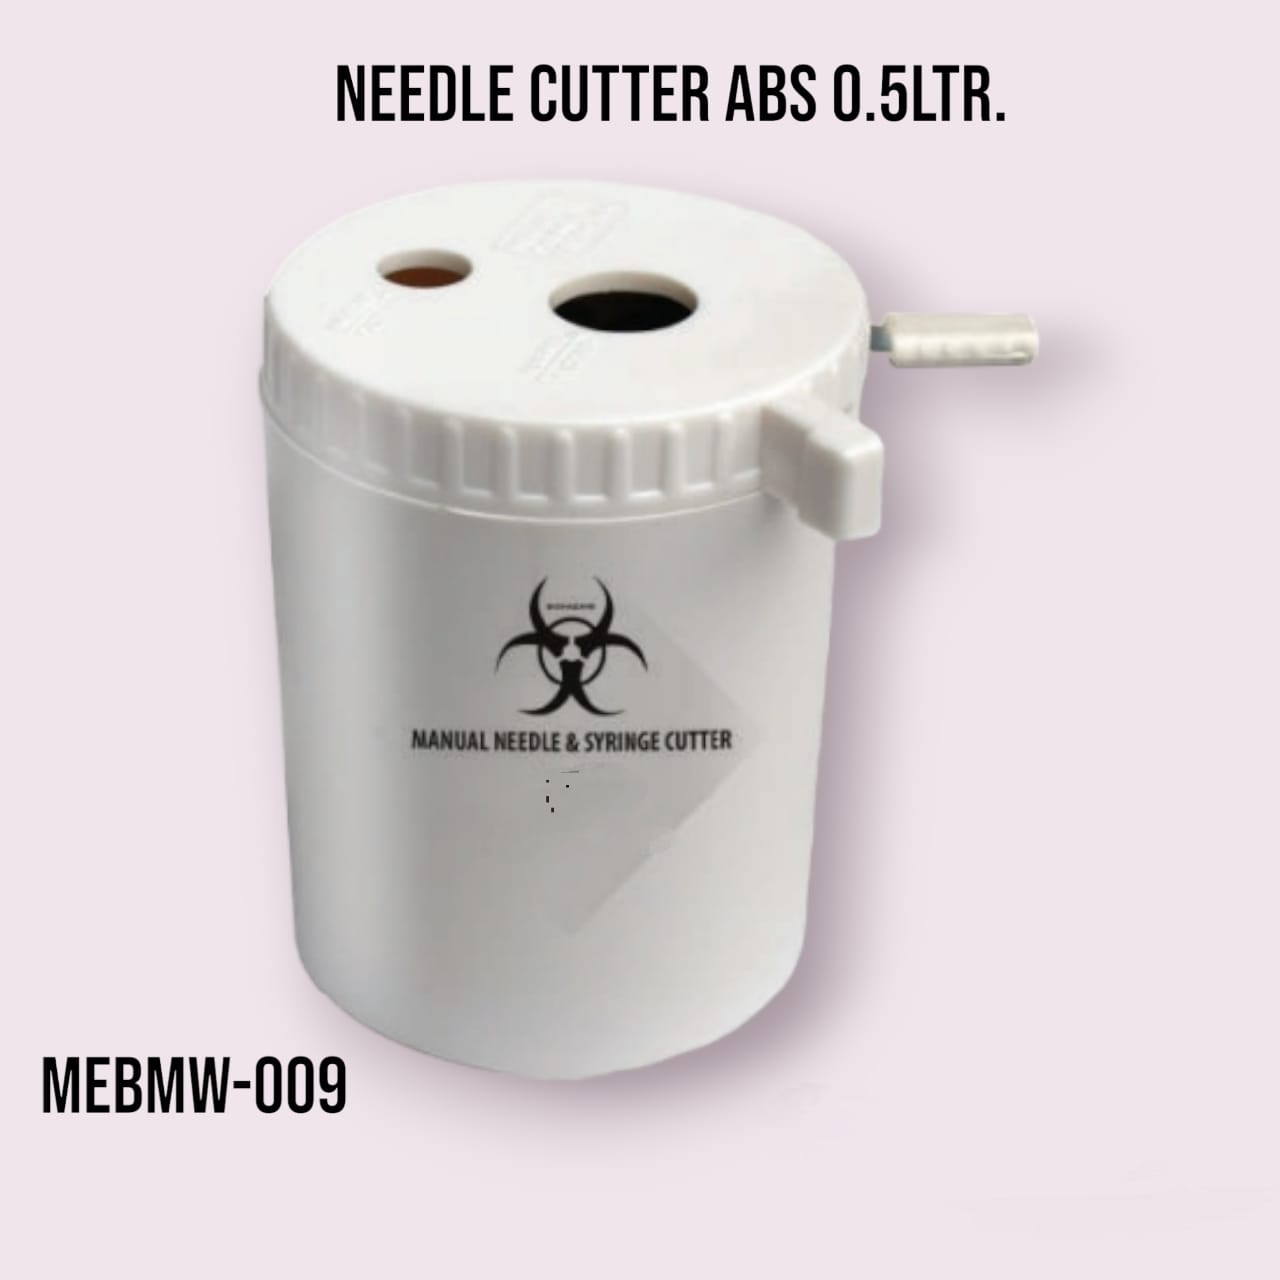 NEEDLE CUTTER ABS